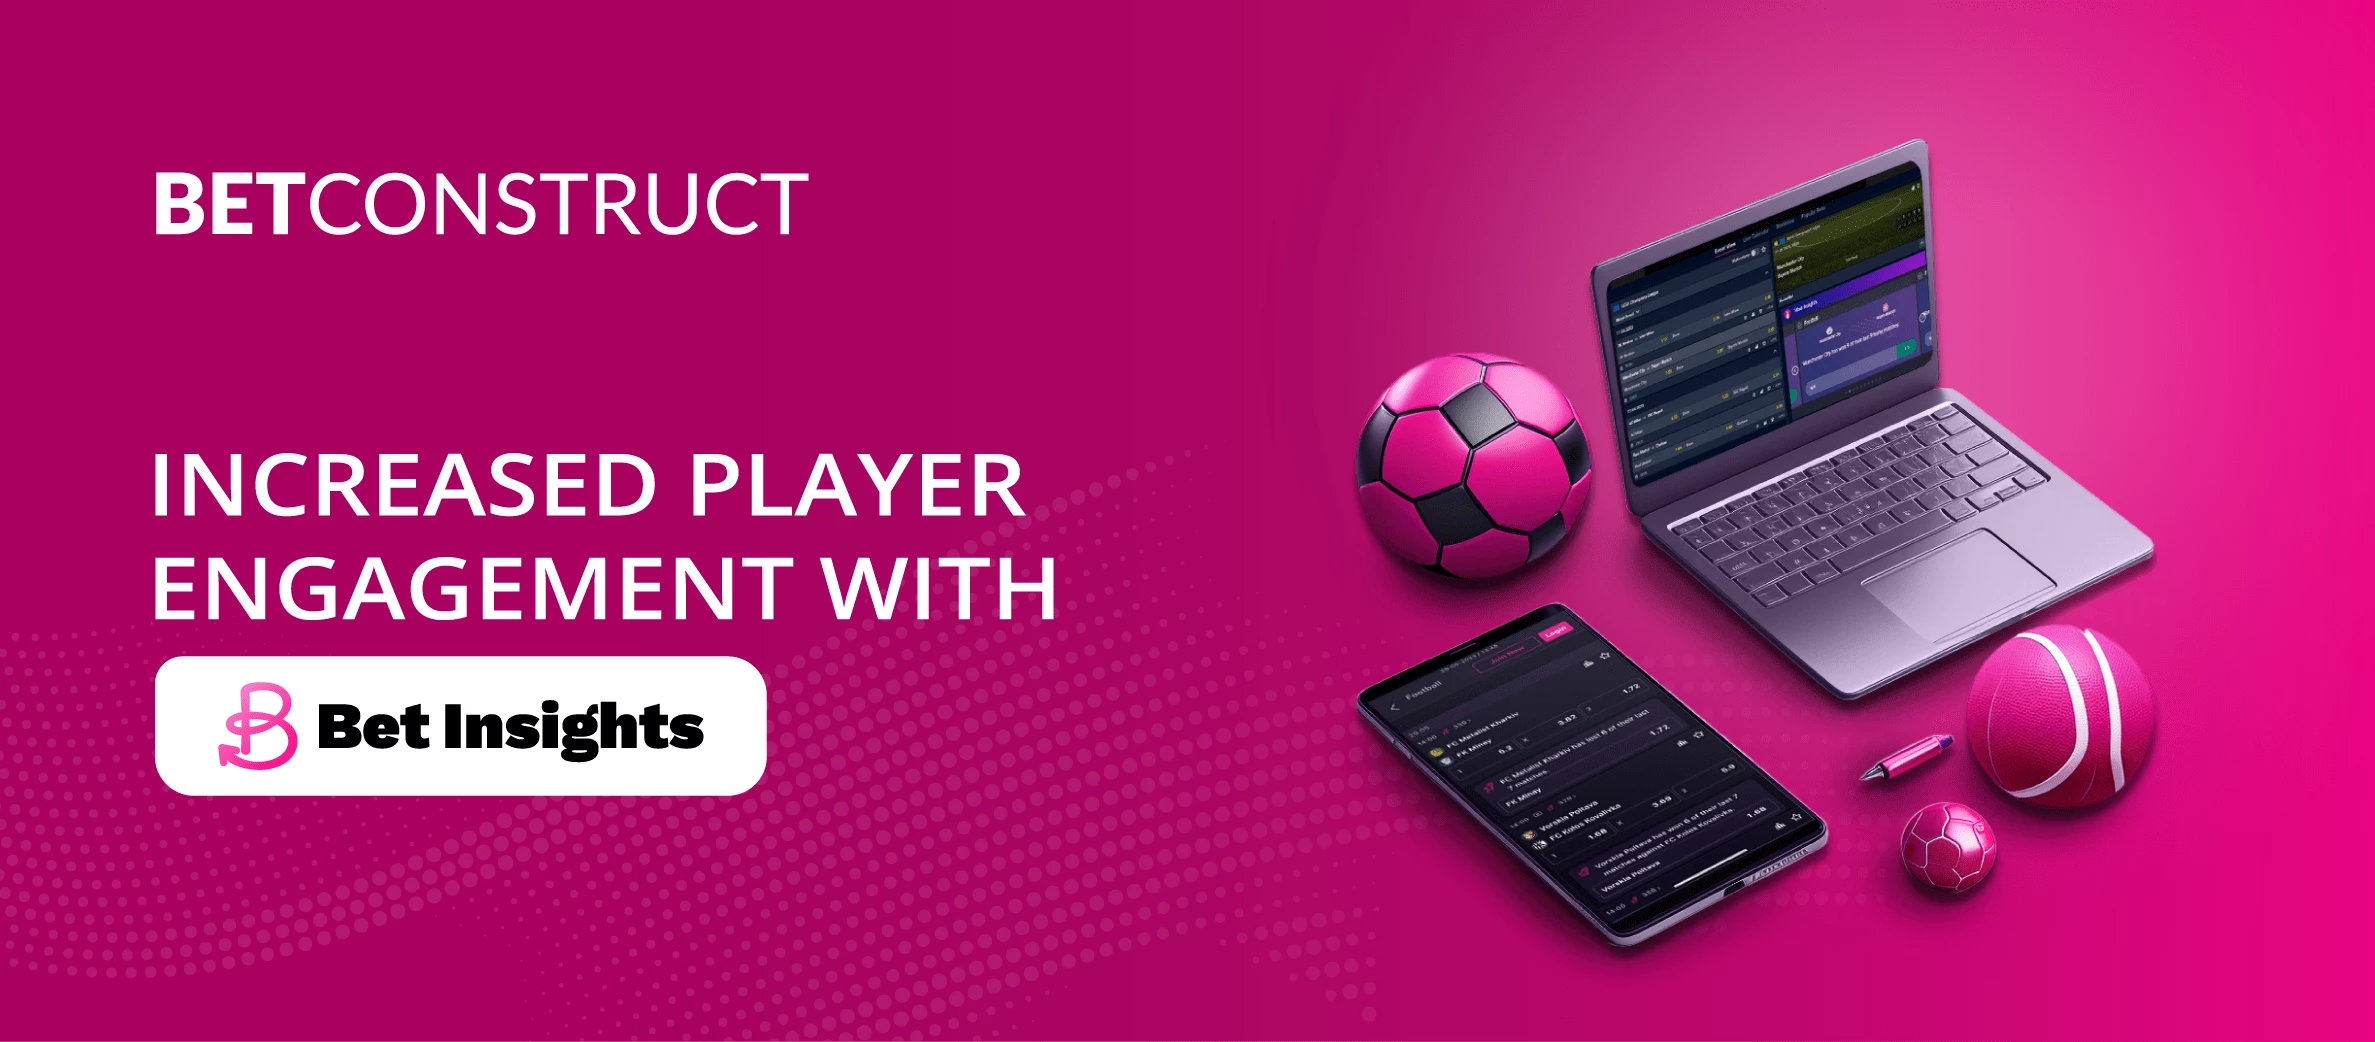 Introducing Bet-Insights: BetConstruct’s Latest System for Increased Player Engagement